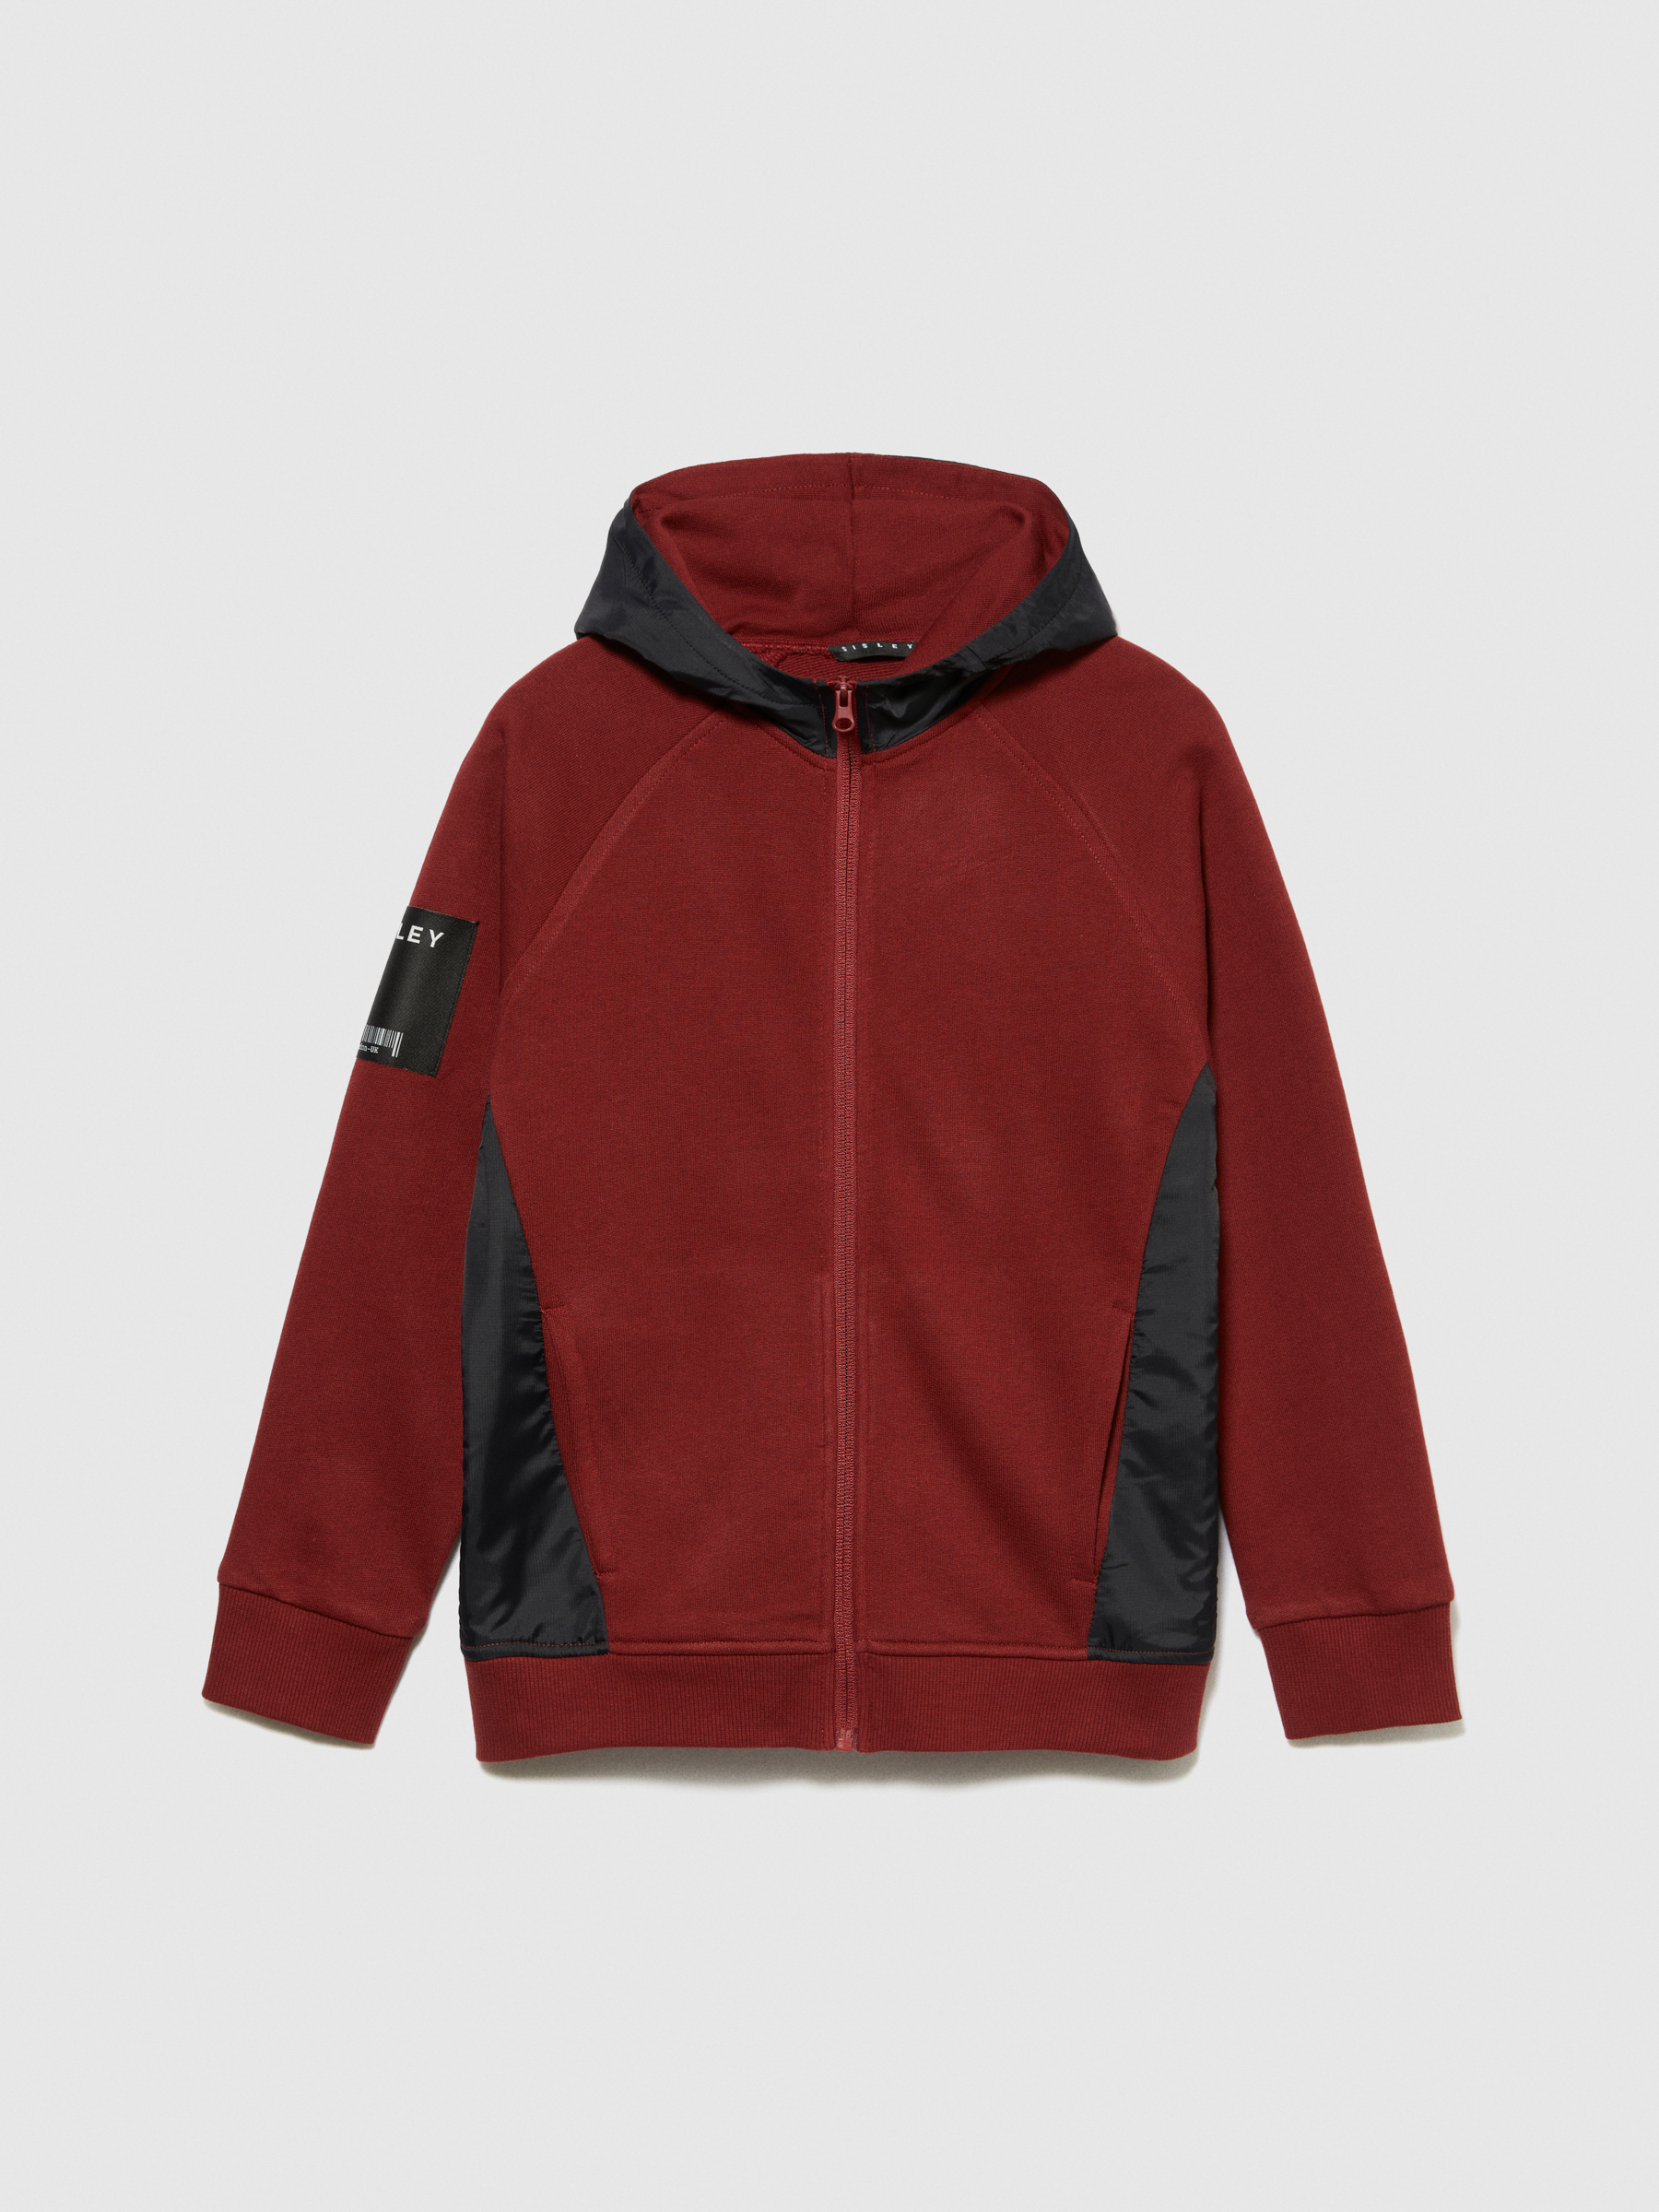 Sisley Young - Mixed Material Hoodie, Man, Burgundy, Size: M